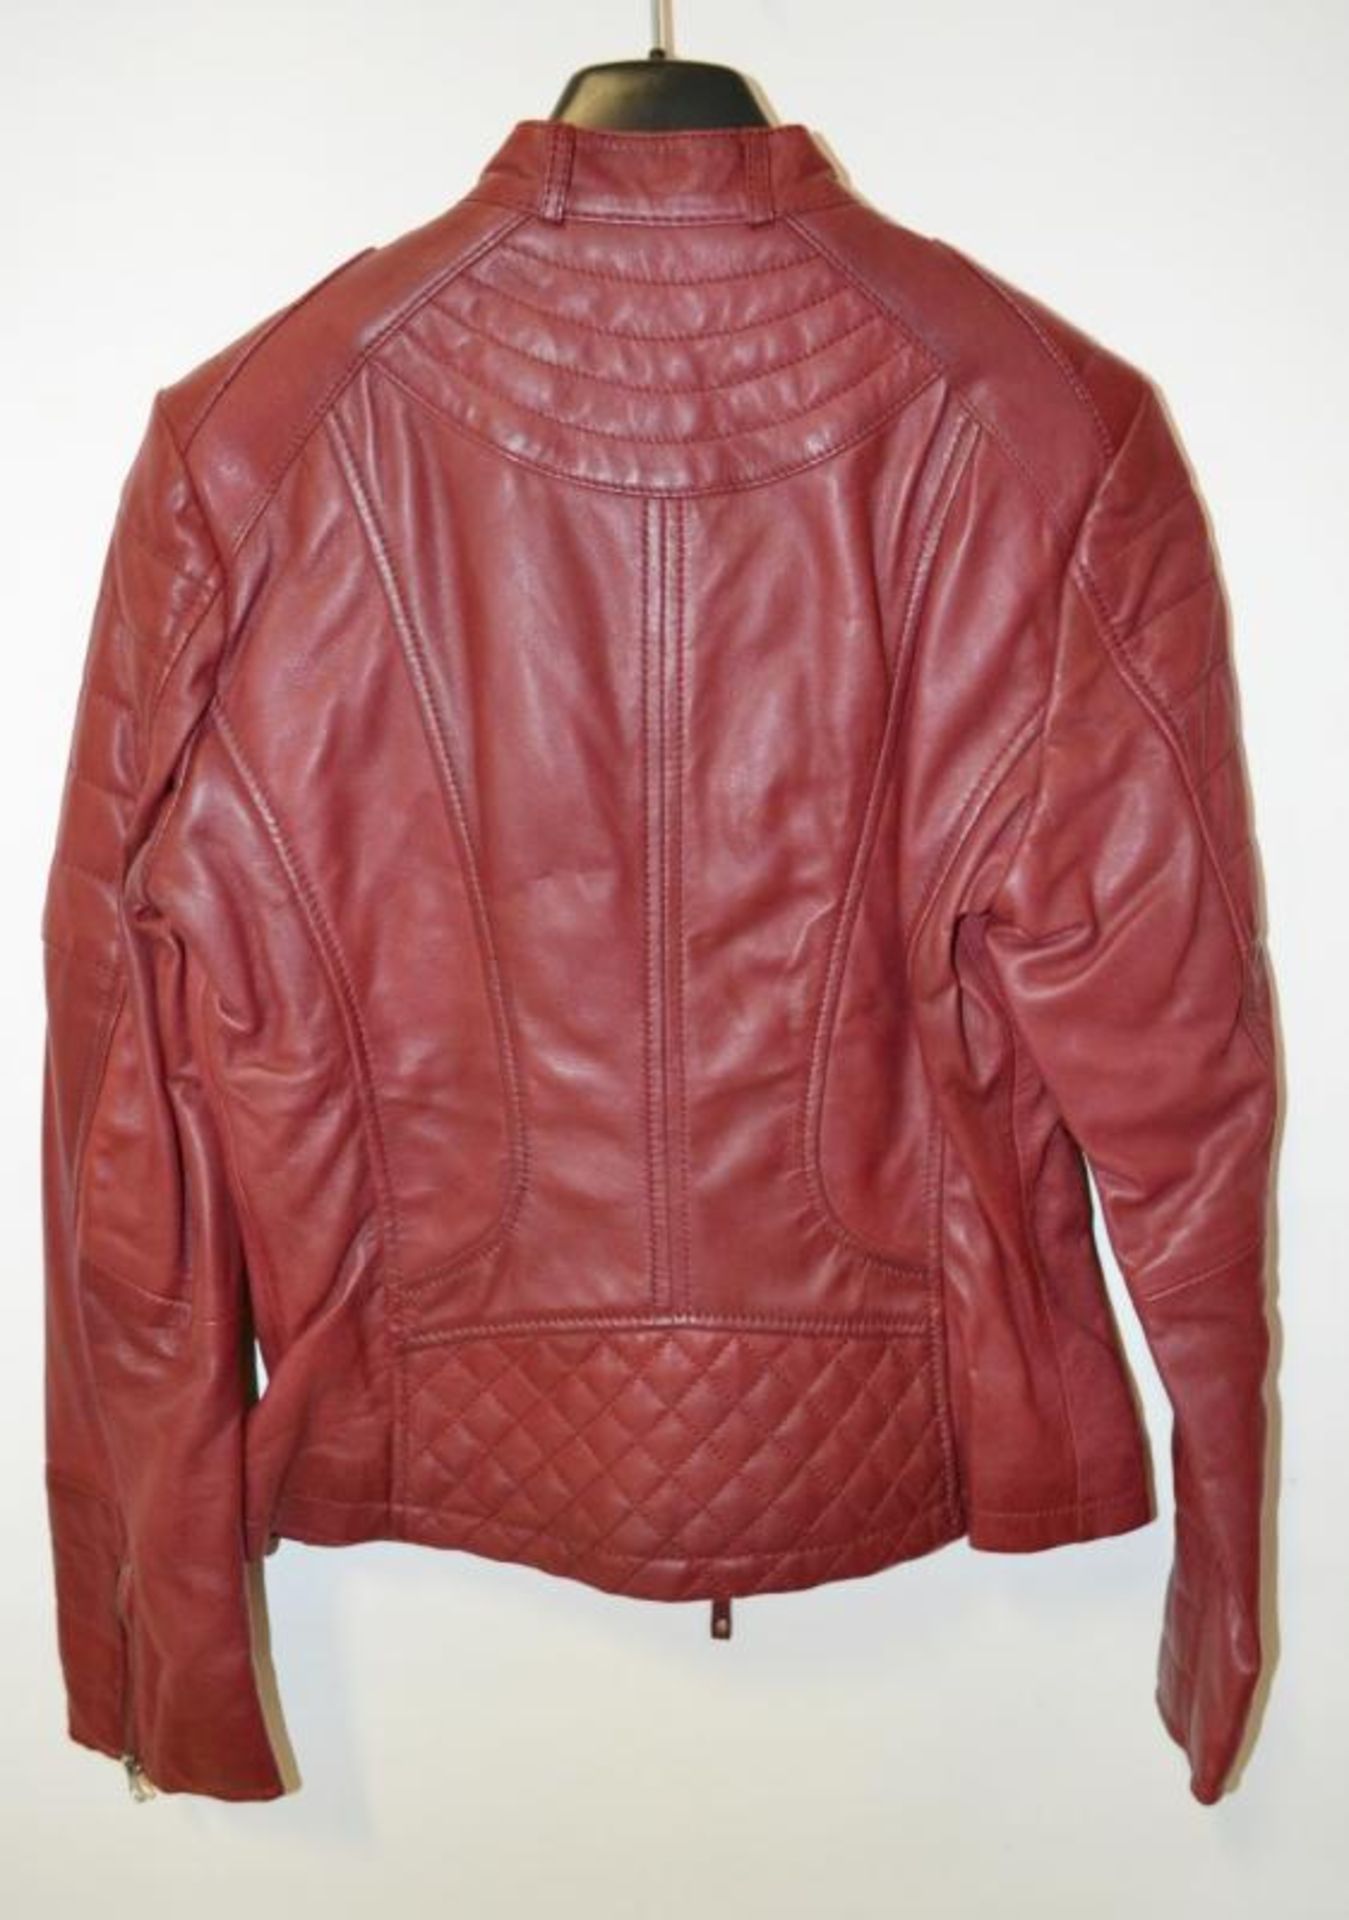 1 x Steilmann Bright Red Fine Leather Biker Jacket - Features Zipped Pockets And Padded Panels - CL2 - Image 6 of 7